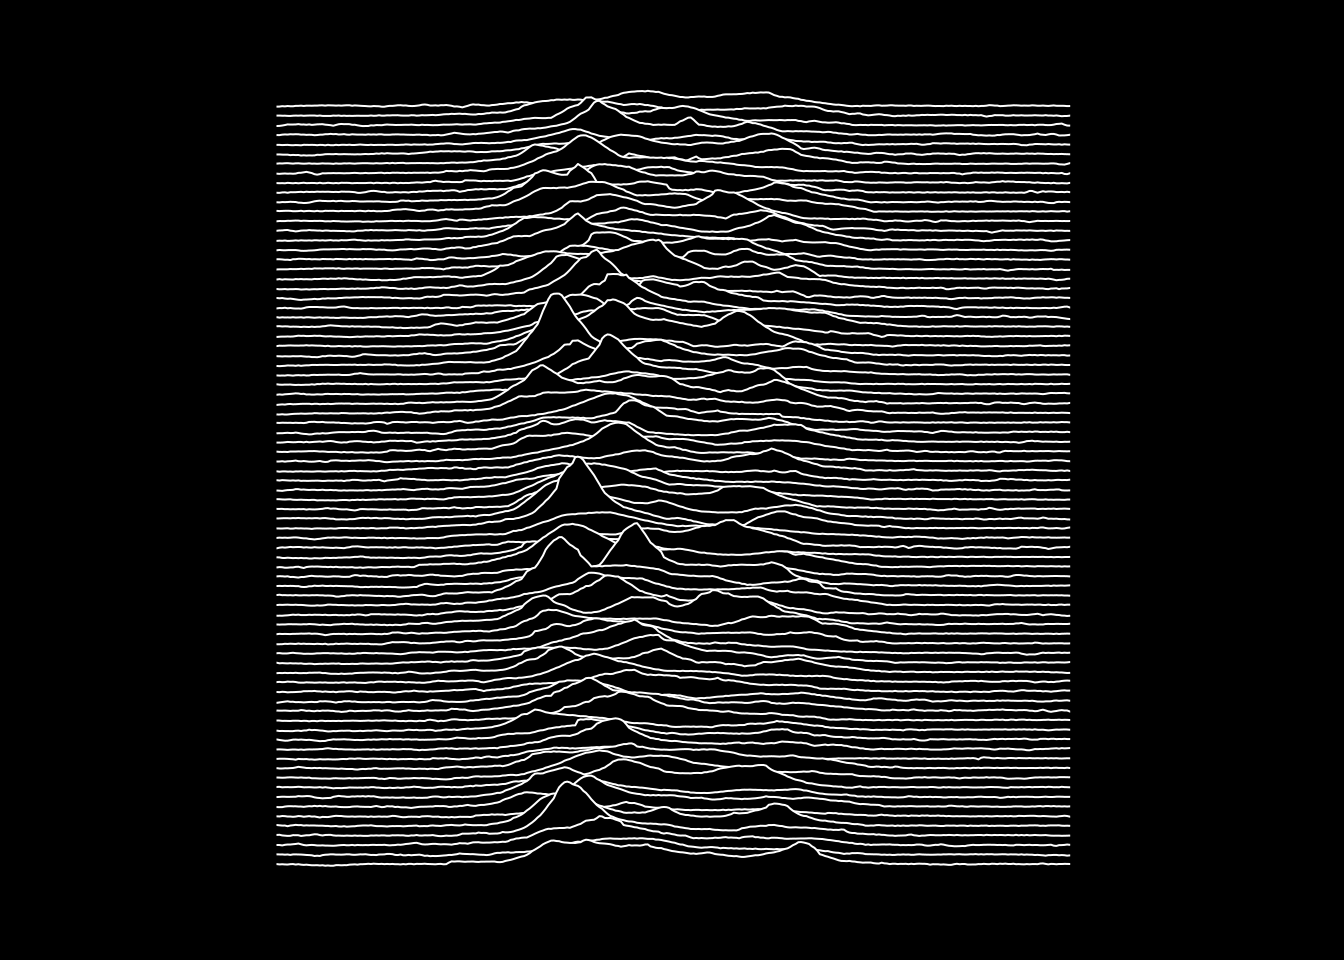 Cover image of the Joy Division 'Unknown Pleasures' album recreated in R using base graphics.